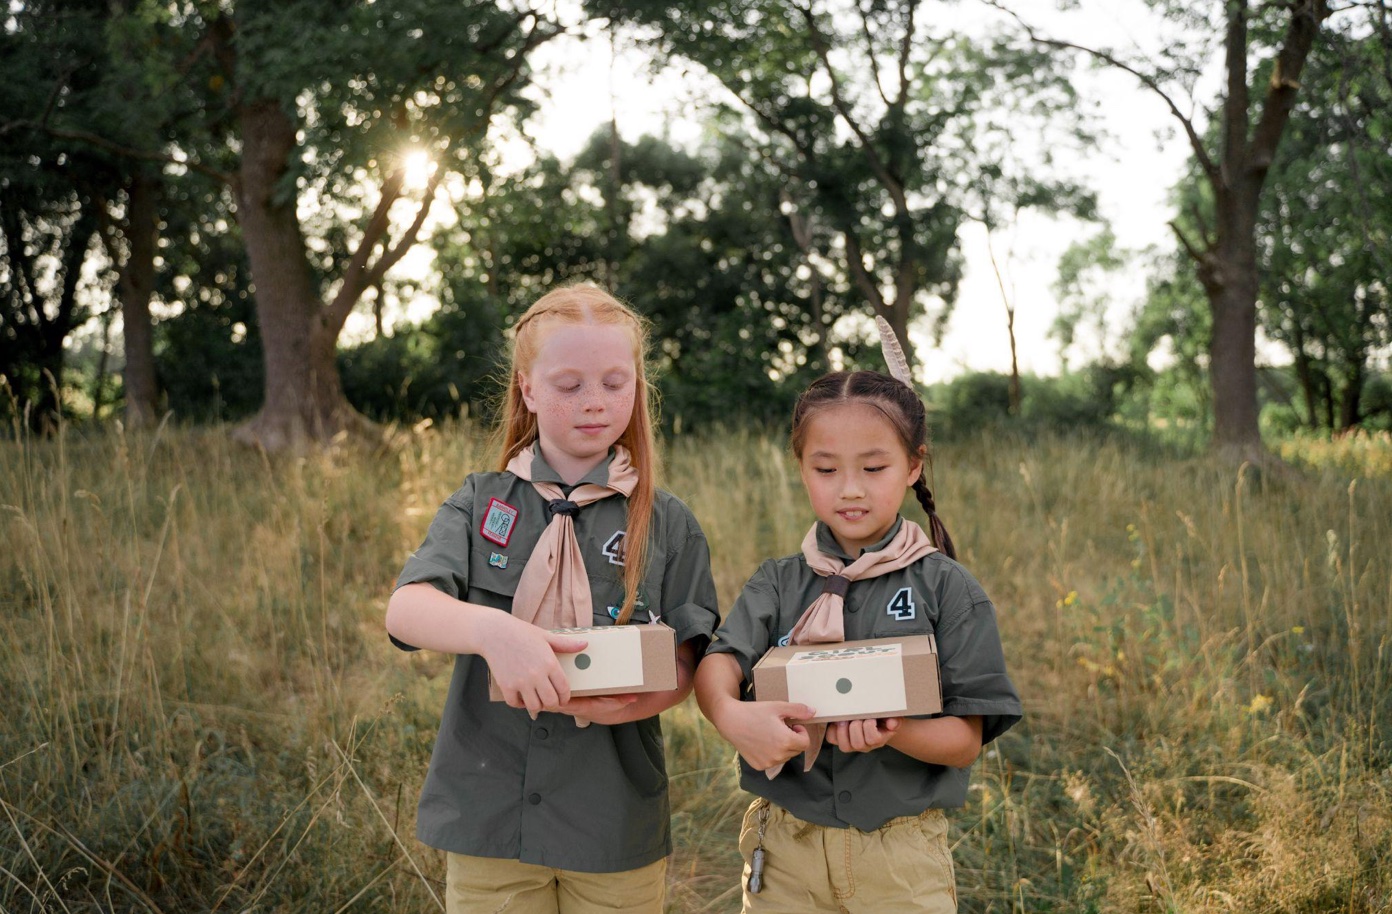 Two Girl Scouts holding boxes in a grassy meadow; image by Cottonbro Productions, via Pexels.com.